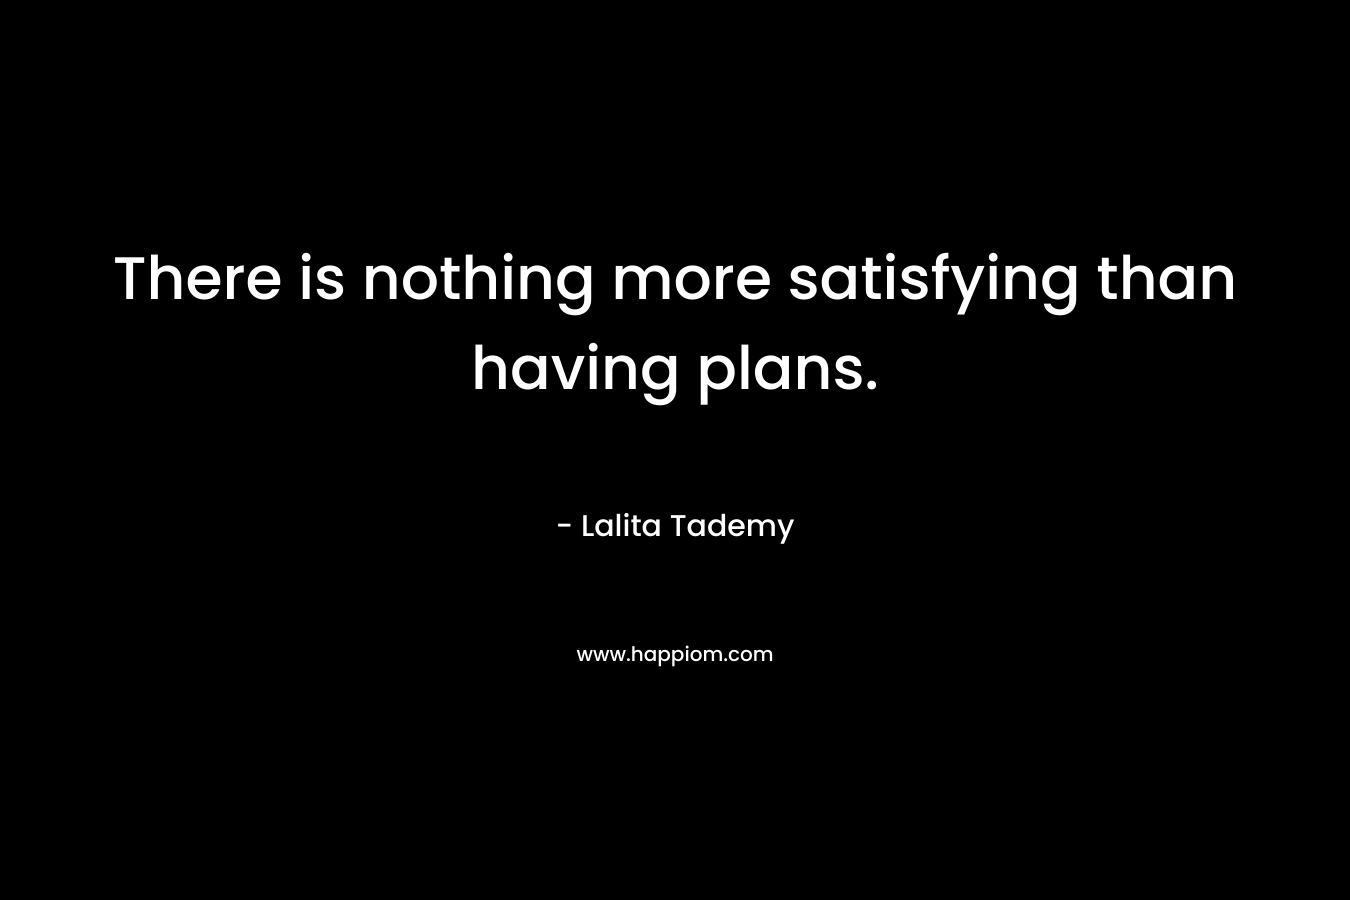 There is nothing more satisfying than having plans.